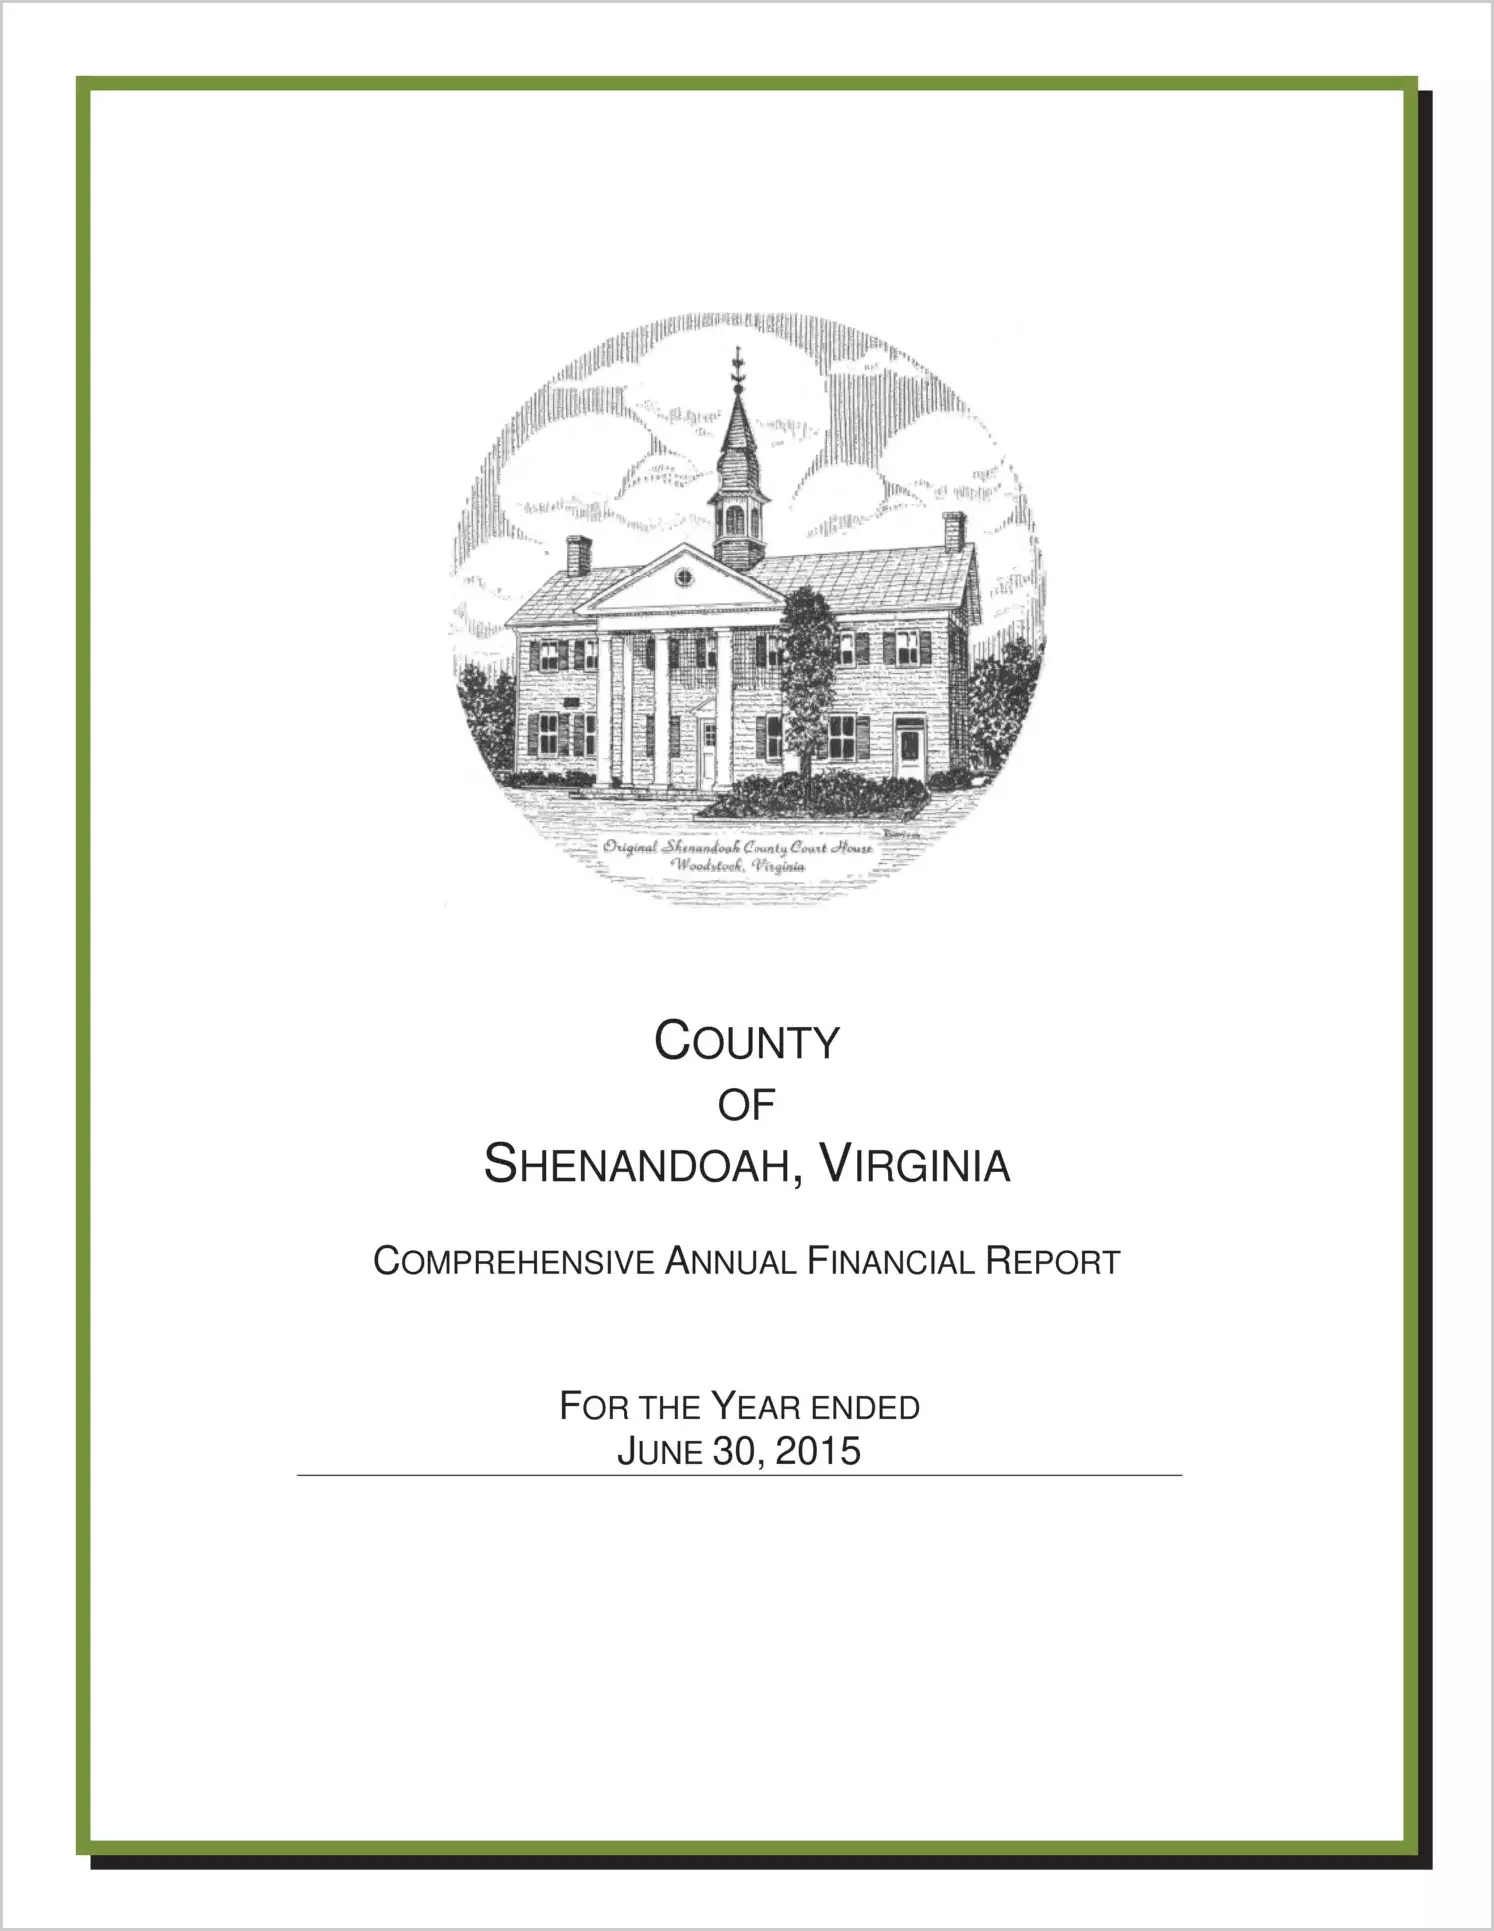 2015 Annual Financial Report for County of Shenandoah